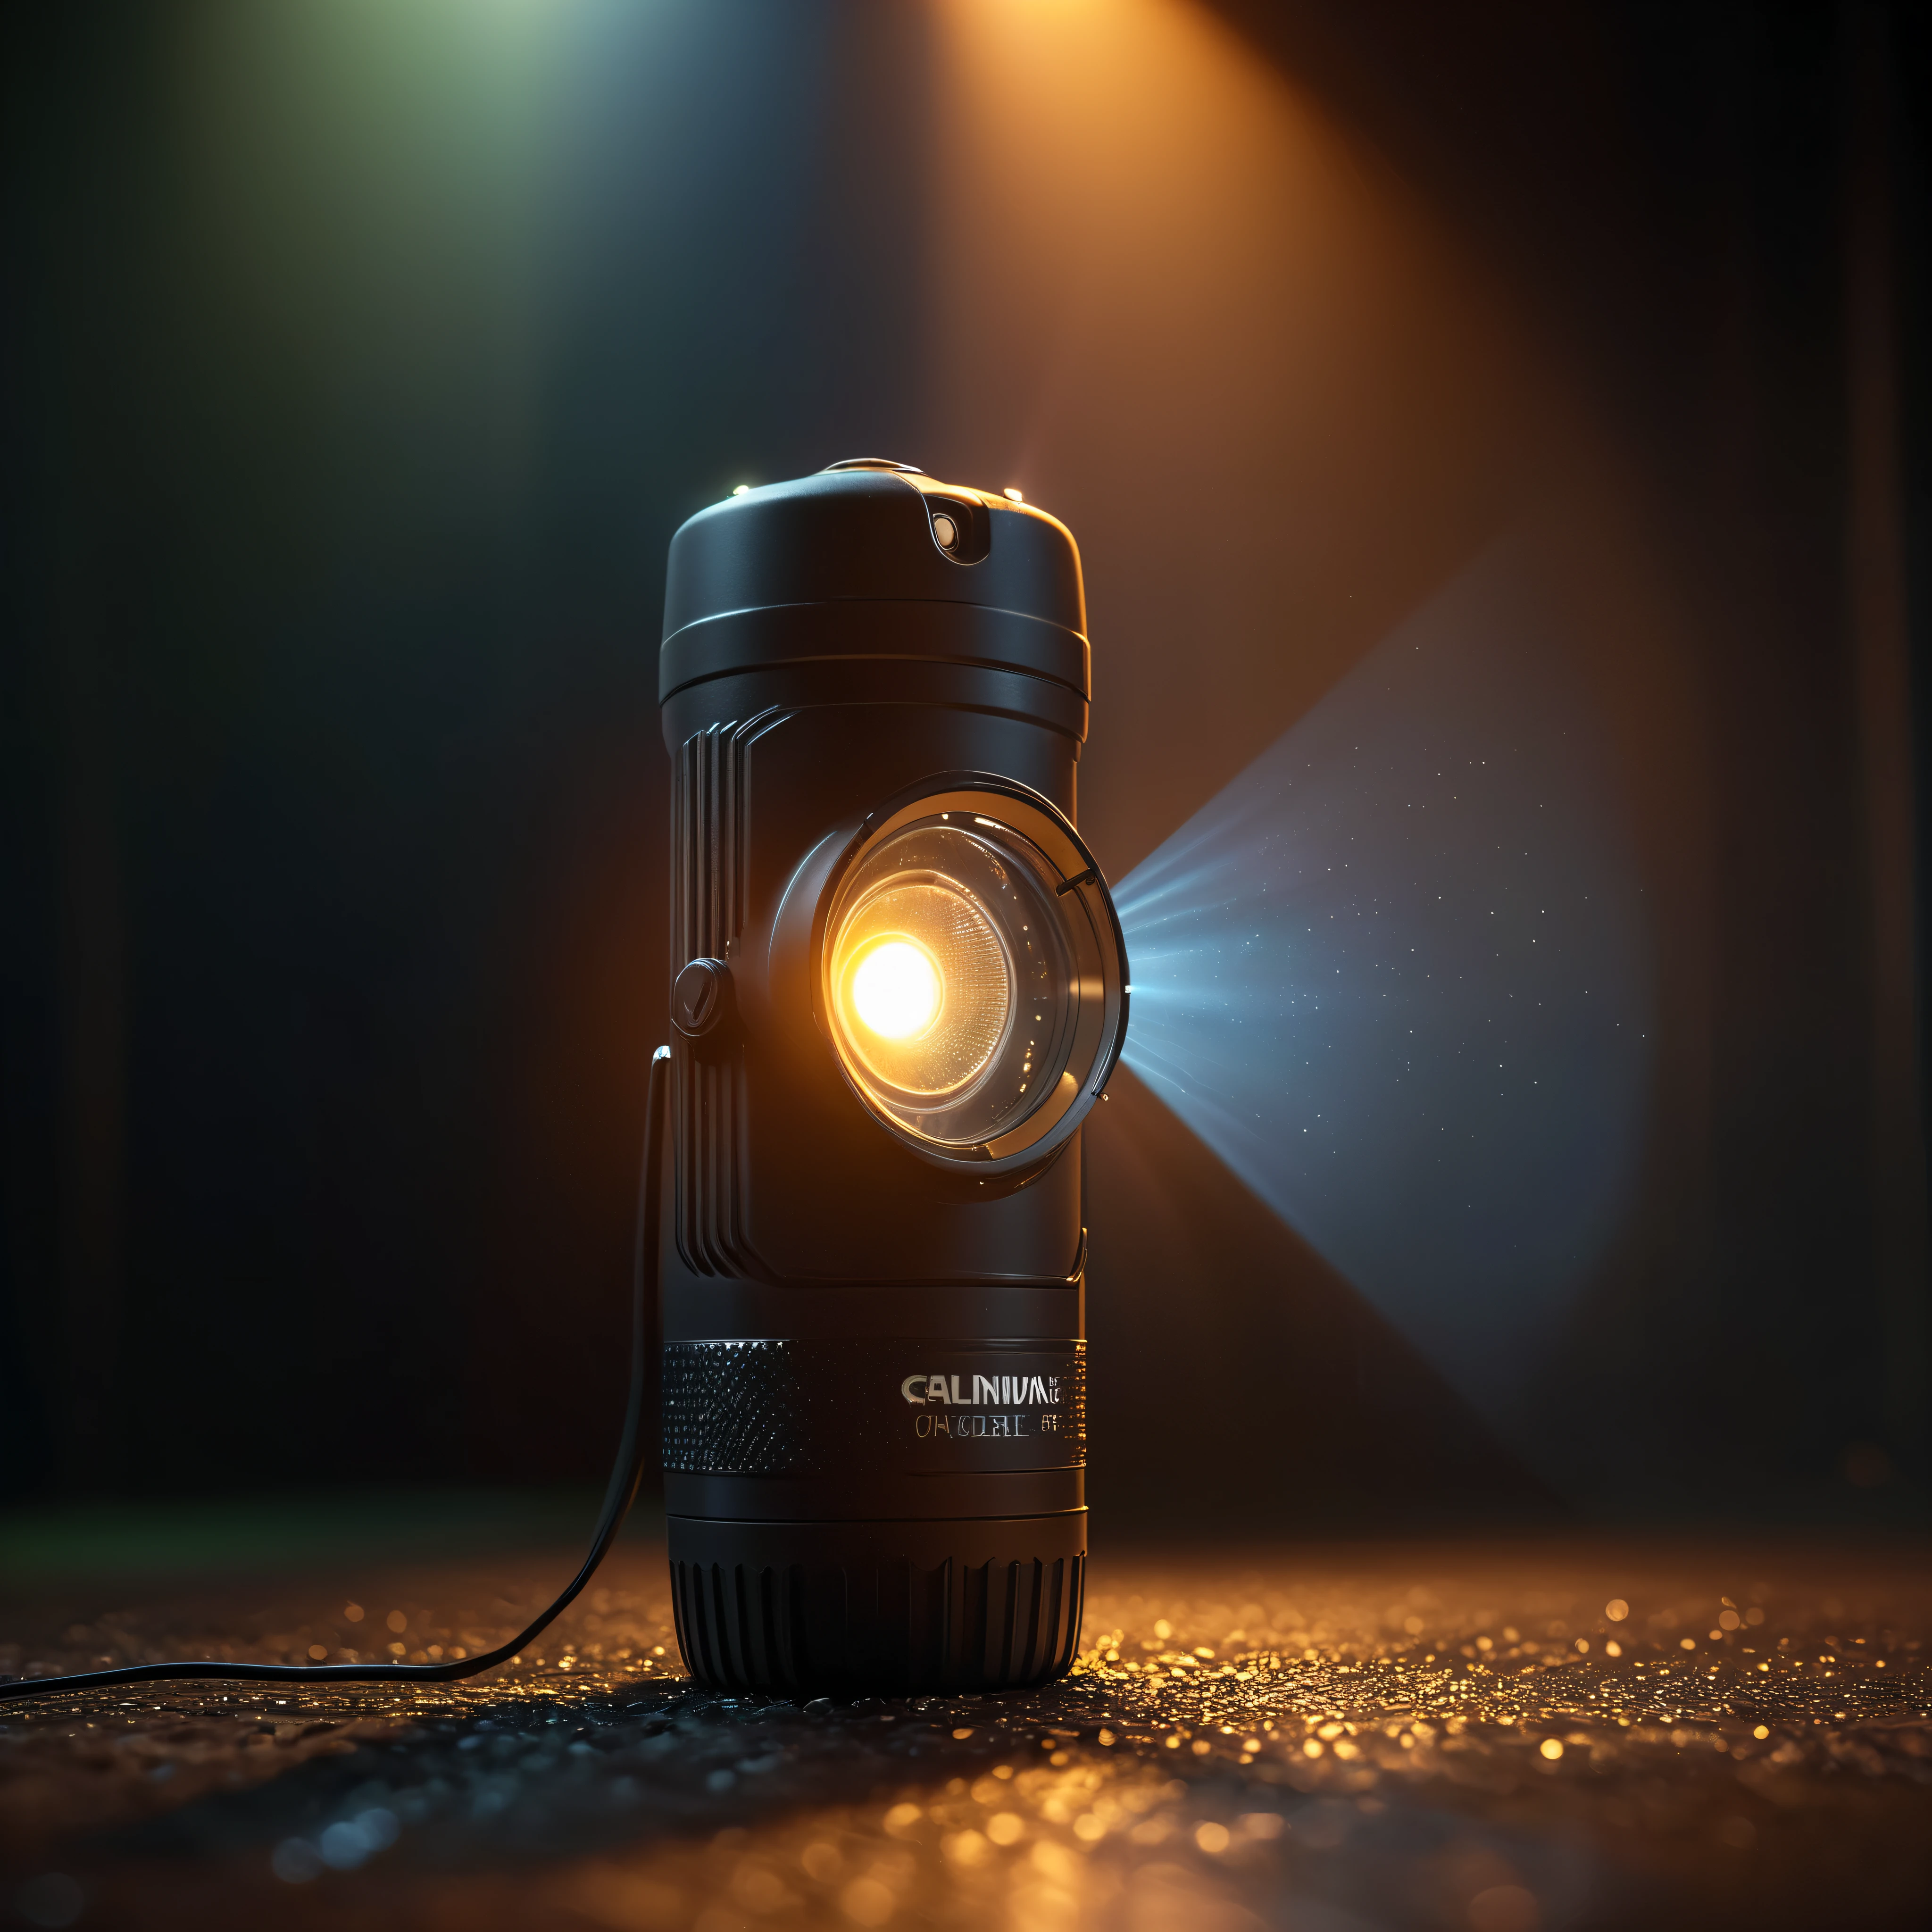 ((Masterpiece in maximum 16K resolution):1.6),((soft_color_photograpy:)1.5), ((Ultra-Detailed):1.4),((Movie-like still images and dynamic angles):1.3). | (Macro shot cinematic photo of a LED flashlight in a very dark room), (minimalism photography art), (black background), (macro lens), (illuminate), (luminous object), (shining LED flashlight), (high tech flashlight), (shimmer), (visual experience),(Realism), (Realistic),award-winning graphics, dark shot, film grain, extremely detailed, Digital Art, rtx, Unreal Engine, scene concept anti glare effect, All captured with sharp focus. | Rendered in ultra-high definition with UHD and retina quality, this masterpiece ensures anatomical correctness and textured skin with super detail. With a focus on high quality and accuracy, this award-winning portrayal captures every nuance in stunning 16k resolution, immersing viewers in its lifelike depiction. | ((perfect_composition, perfect_design, perfect_layout, perfect_detail, ultra_detailed)), ((enhance_all, fix_everything)), More Detail, Enhance.